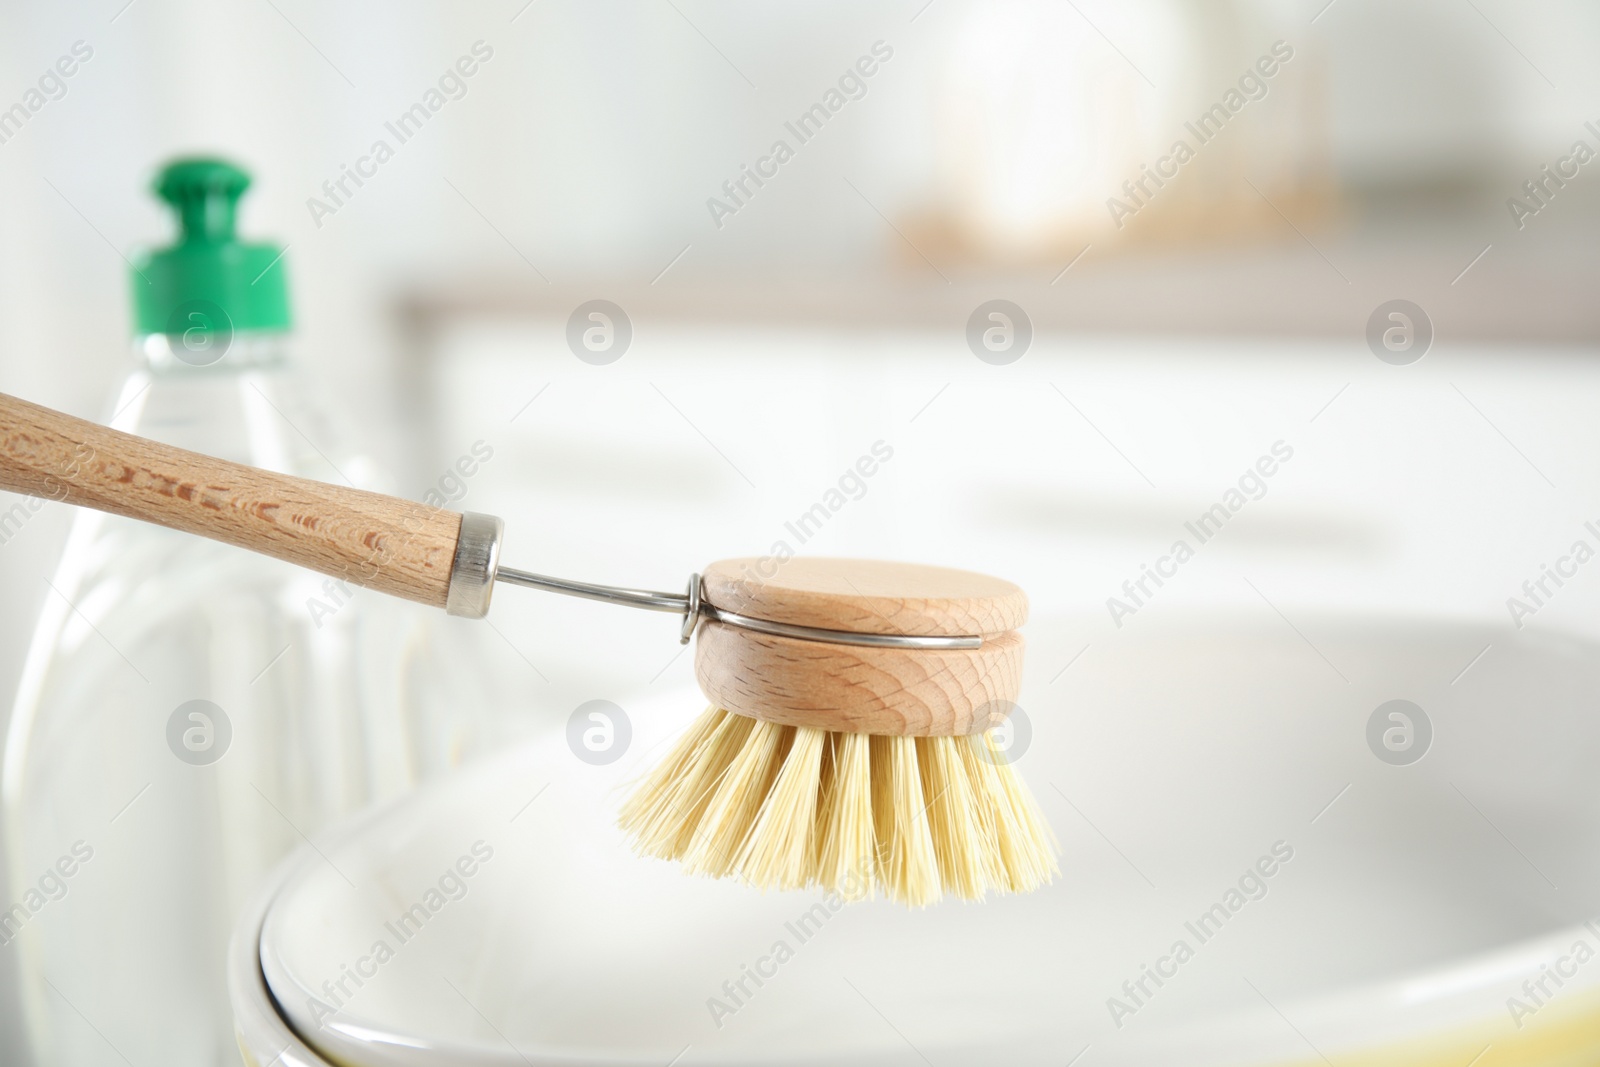 Photo of Cleaning brush for dish washing indoors, closeup